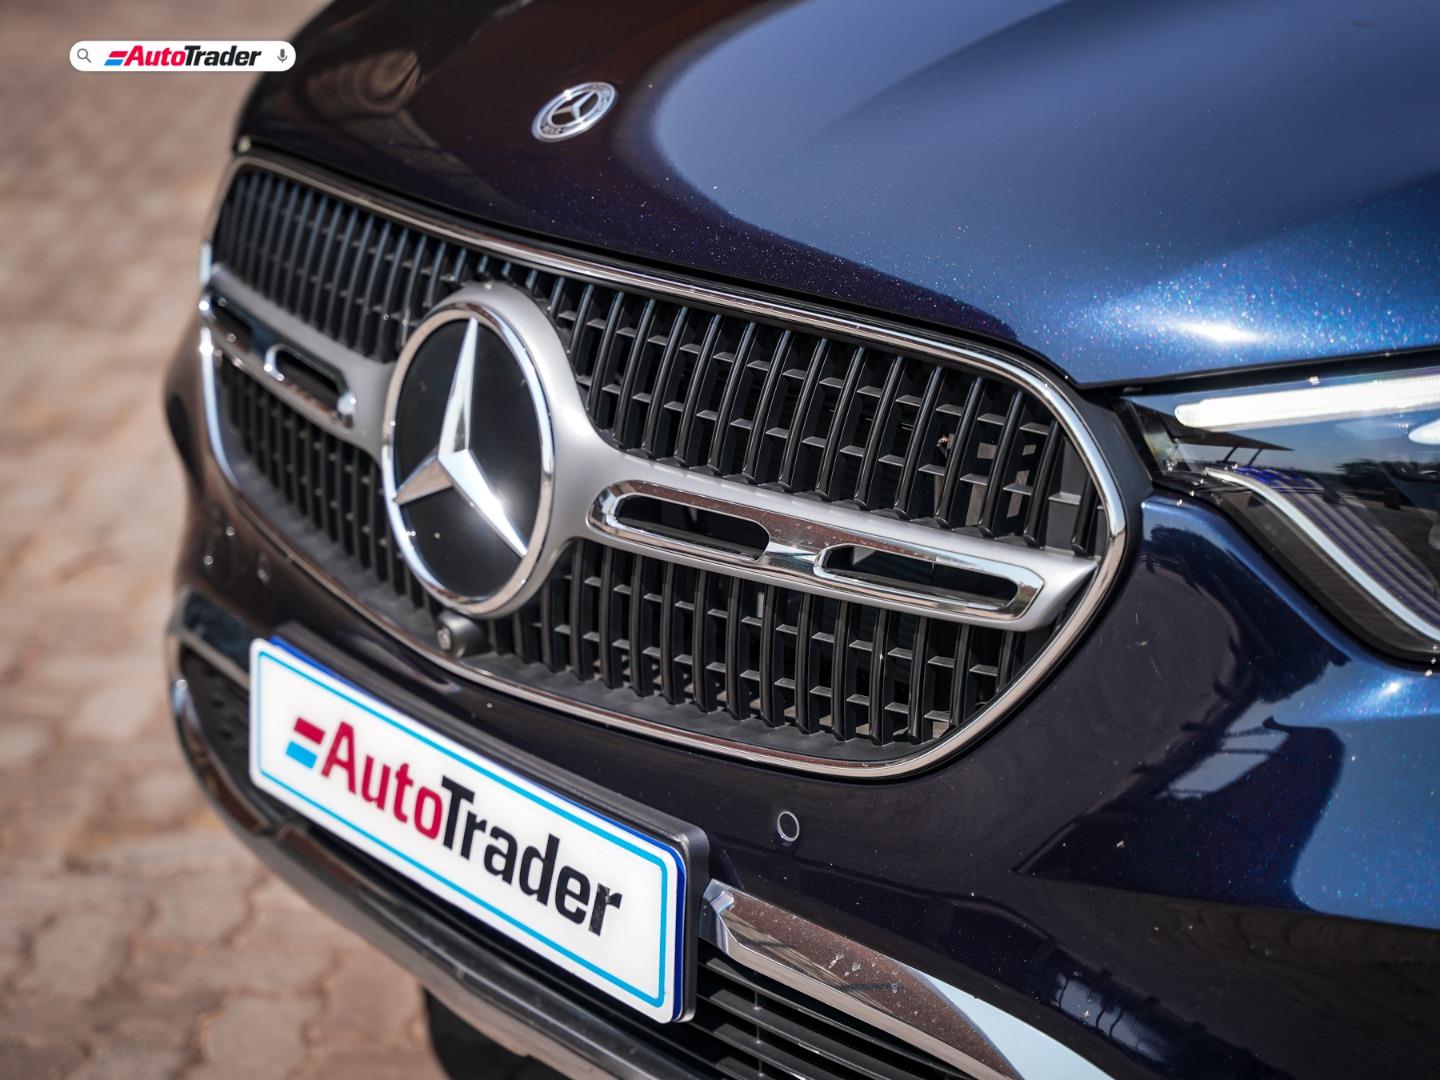 mercedes-benz glc220d 4matic avantgarde (2023) review - why entry-level equals best-selling